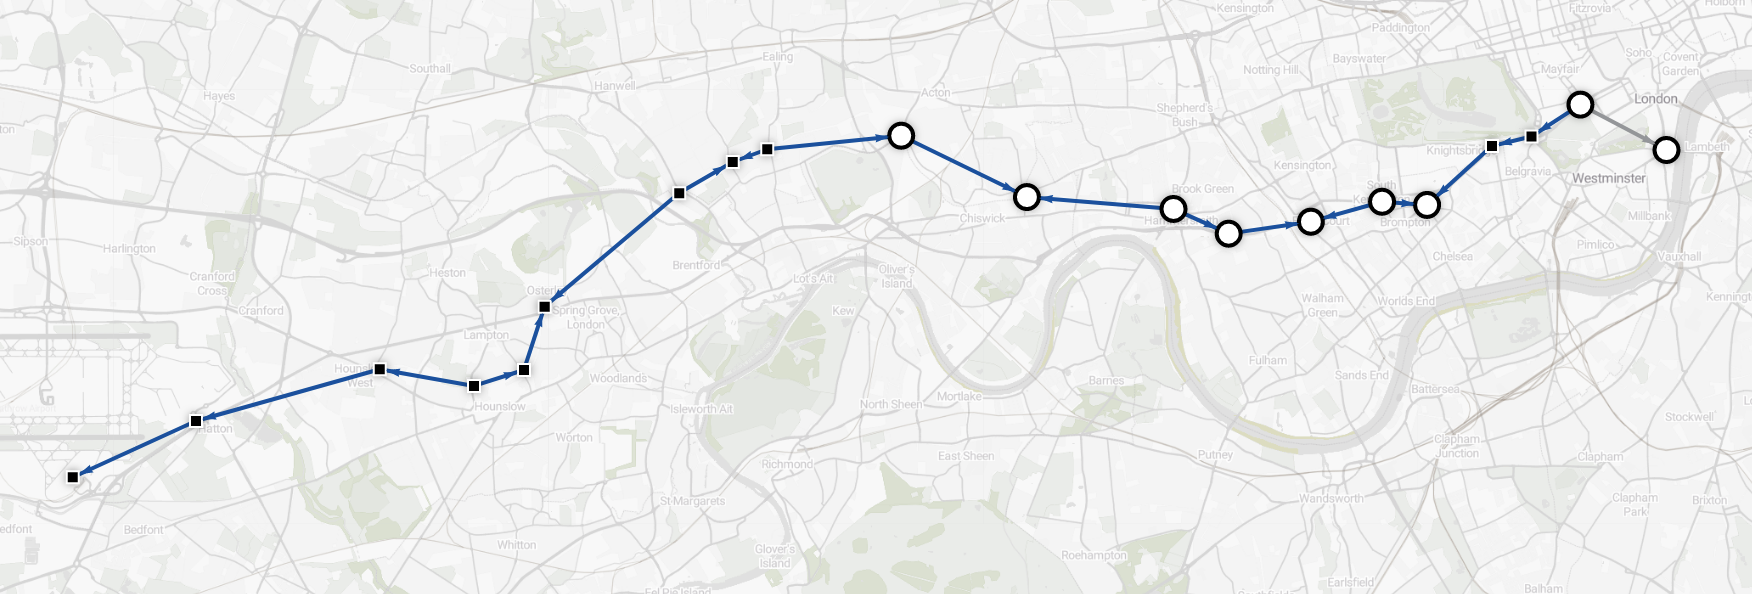 Data visualization - shortest route from Heathrow to Westminster (Circle and District lines excluded)